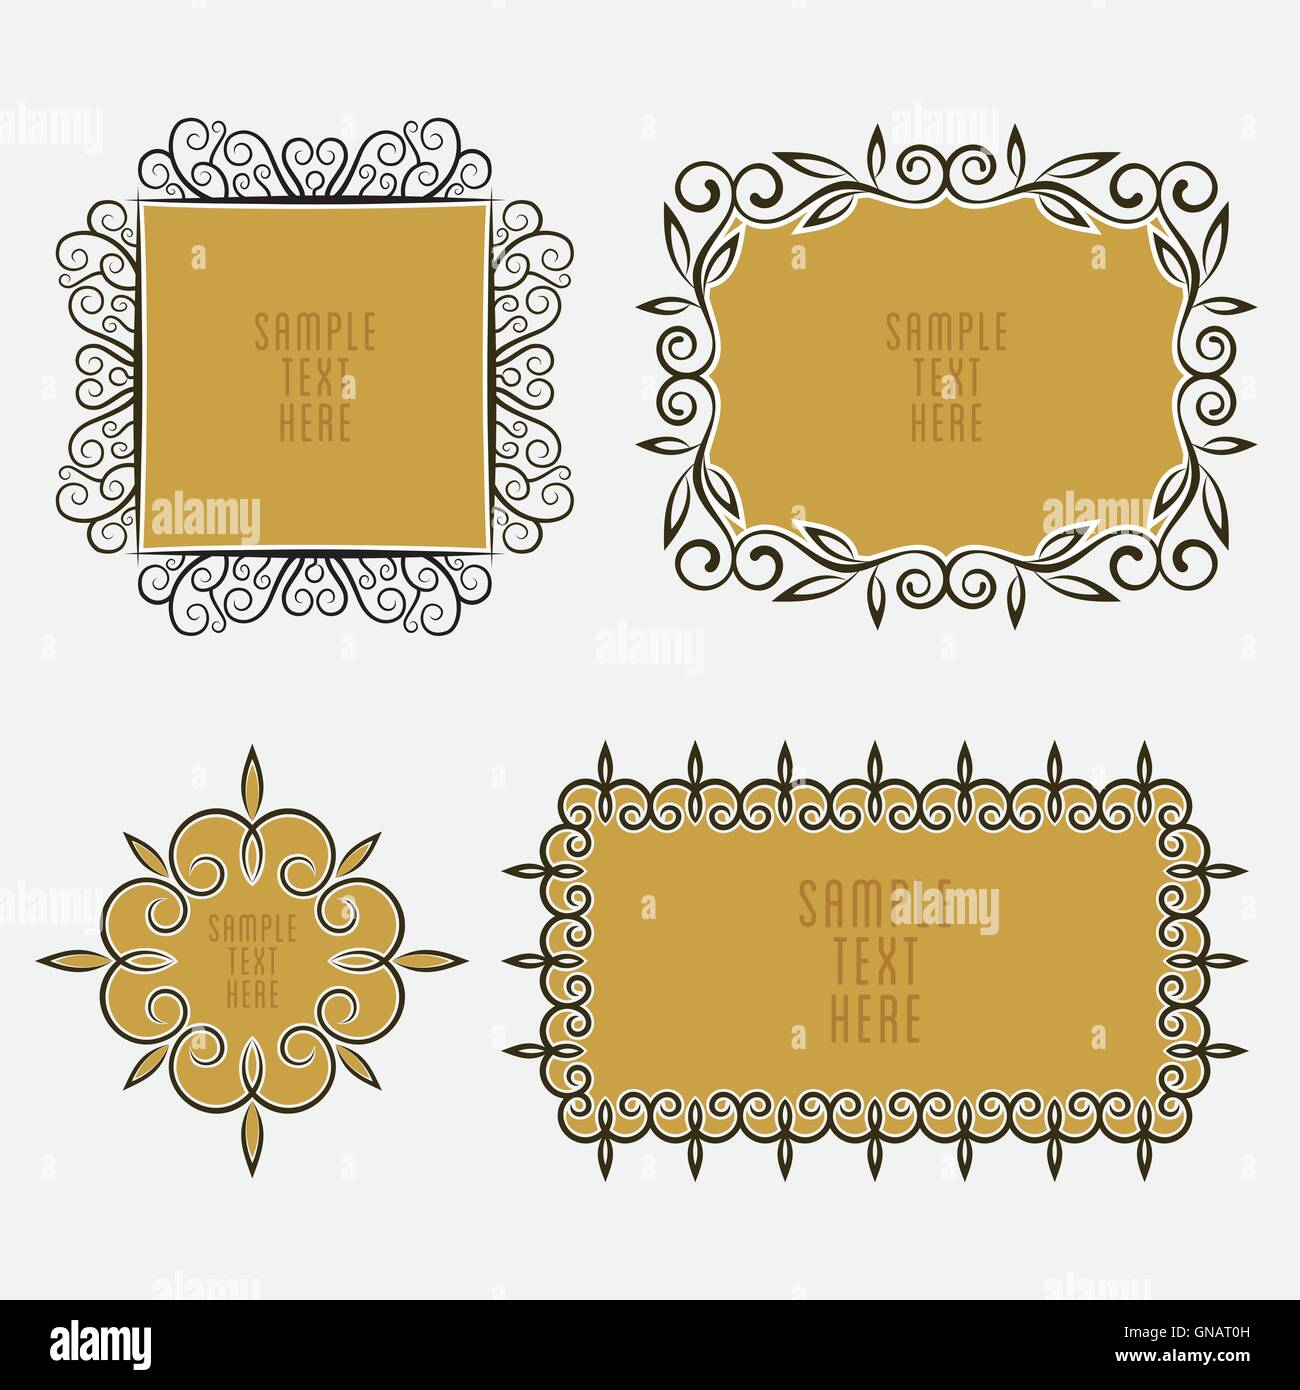 Gold stickers with vintage design labels Vector Image